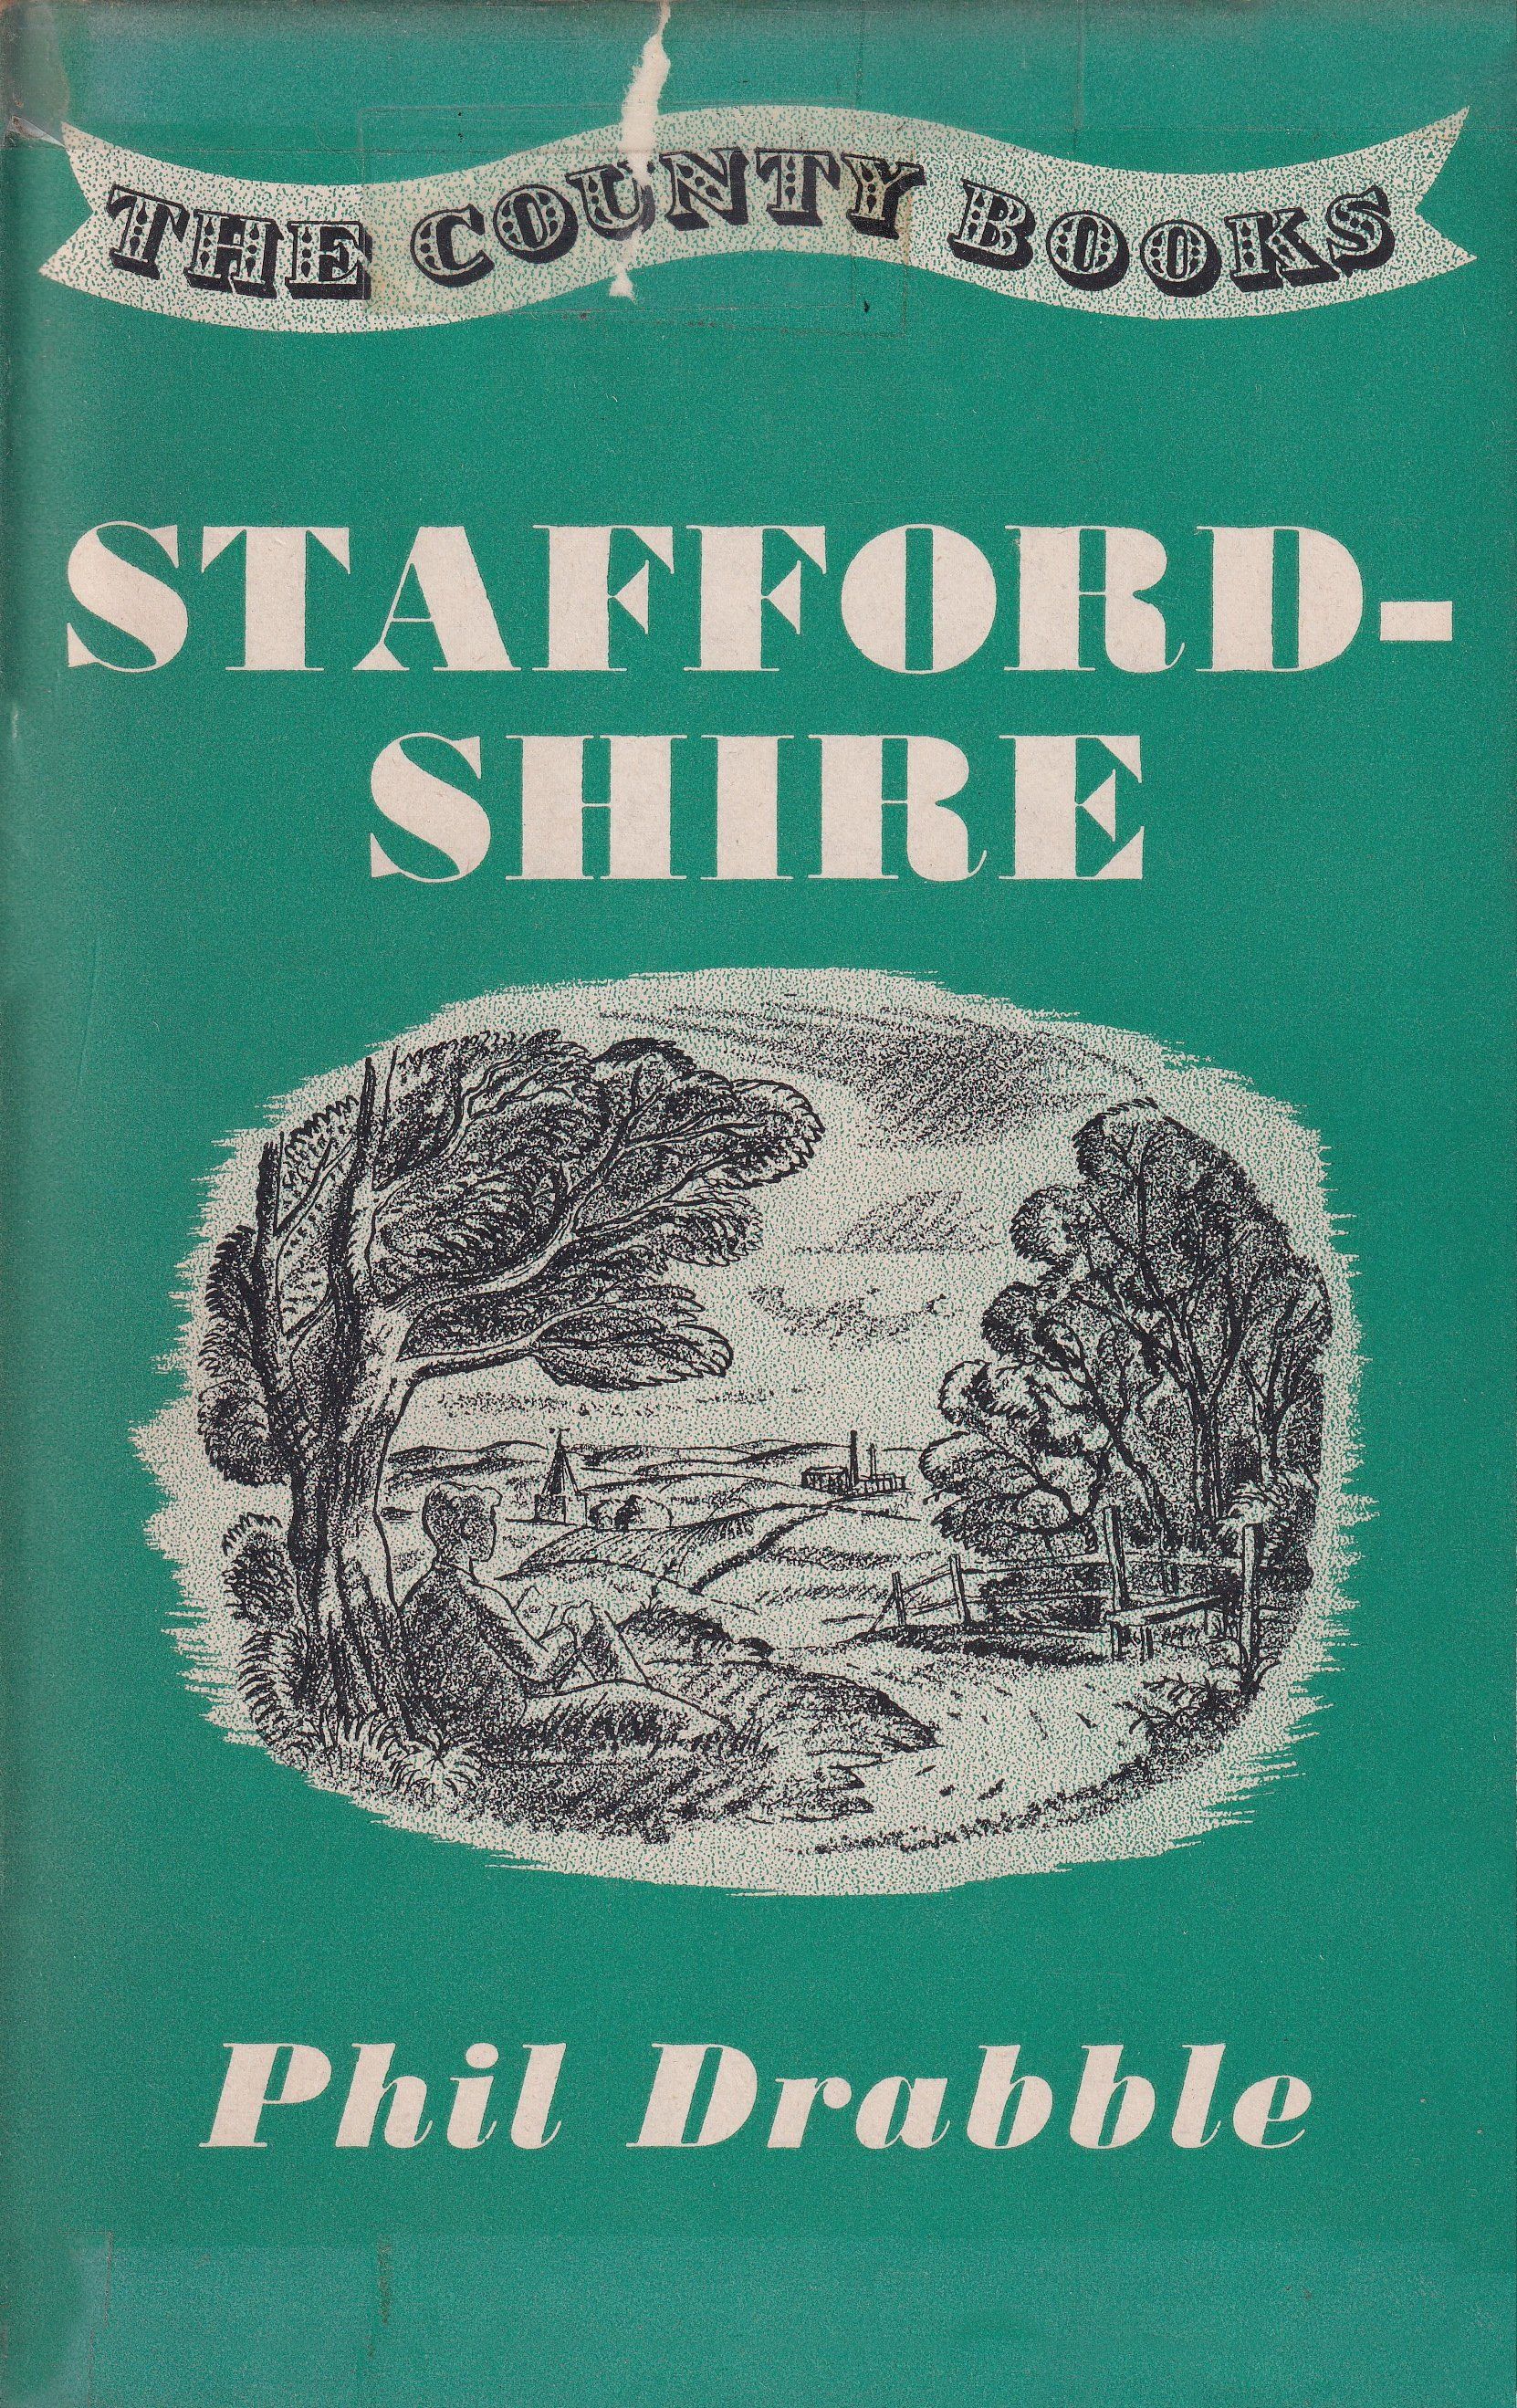 Staffordshire by Phil Drabble